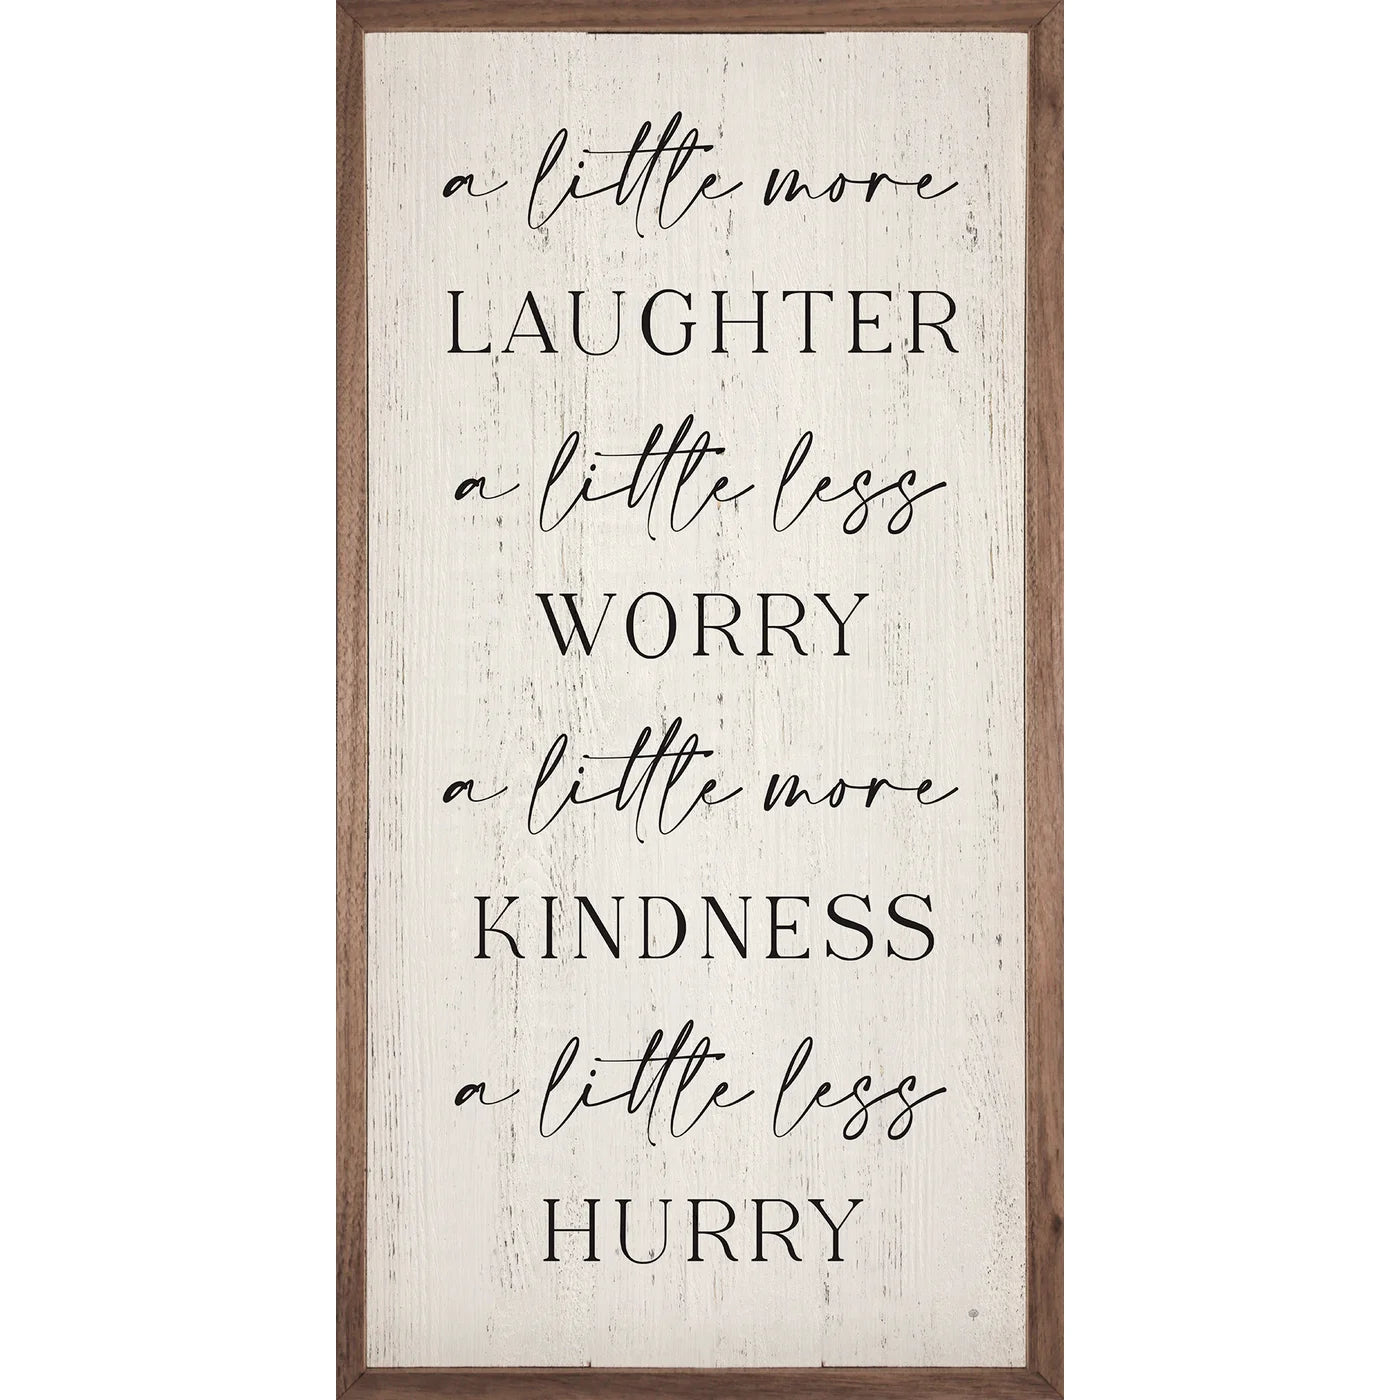 Laughter Worry Kindness Hurry Whitewash Wood Framed Print